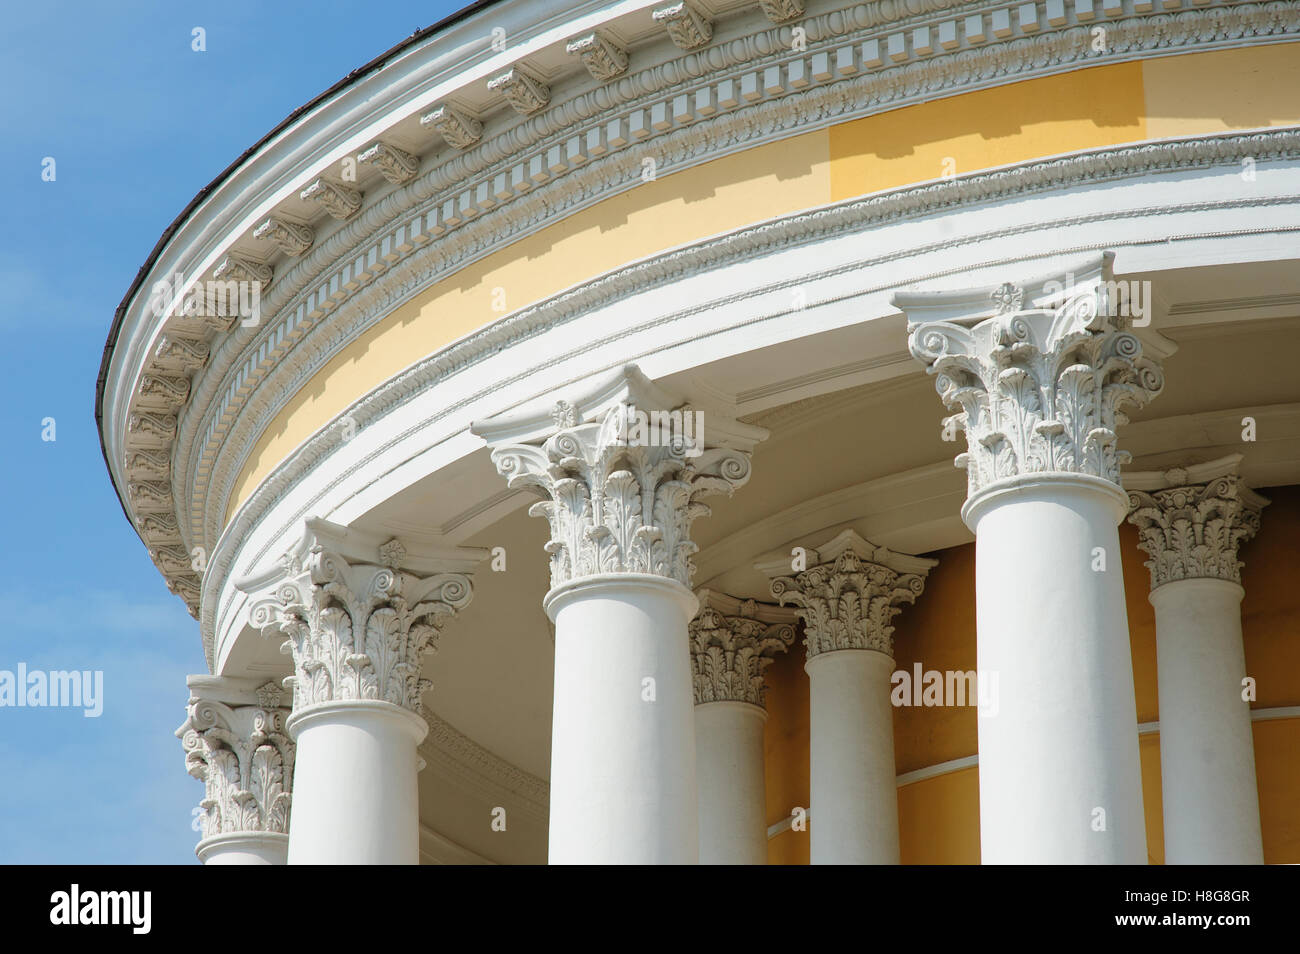 White columns on the facade of architectural buildings Stock Photo